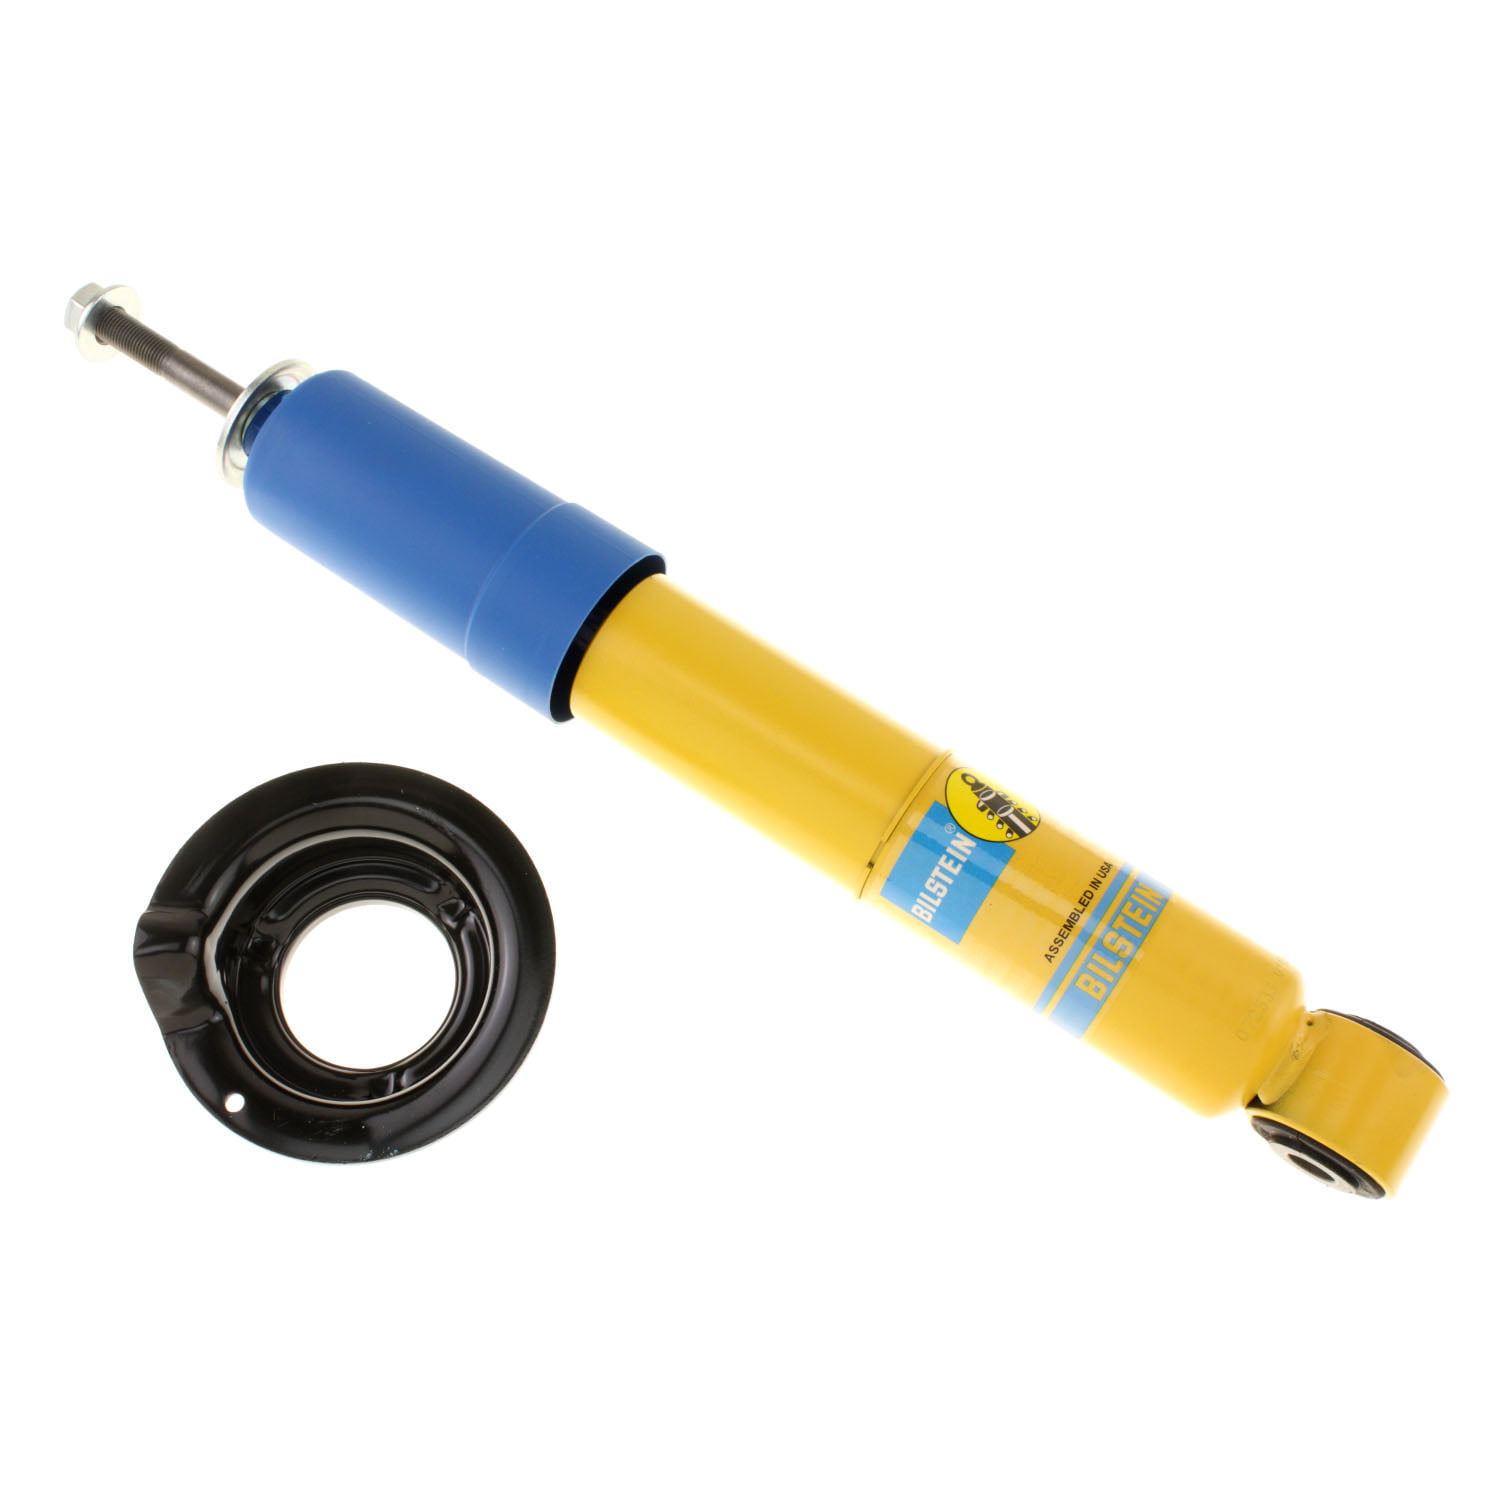 Bilstein Monotube Shock Absorbers Front/Rear Set of 4 For 05-12 Pathfinder